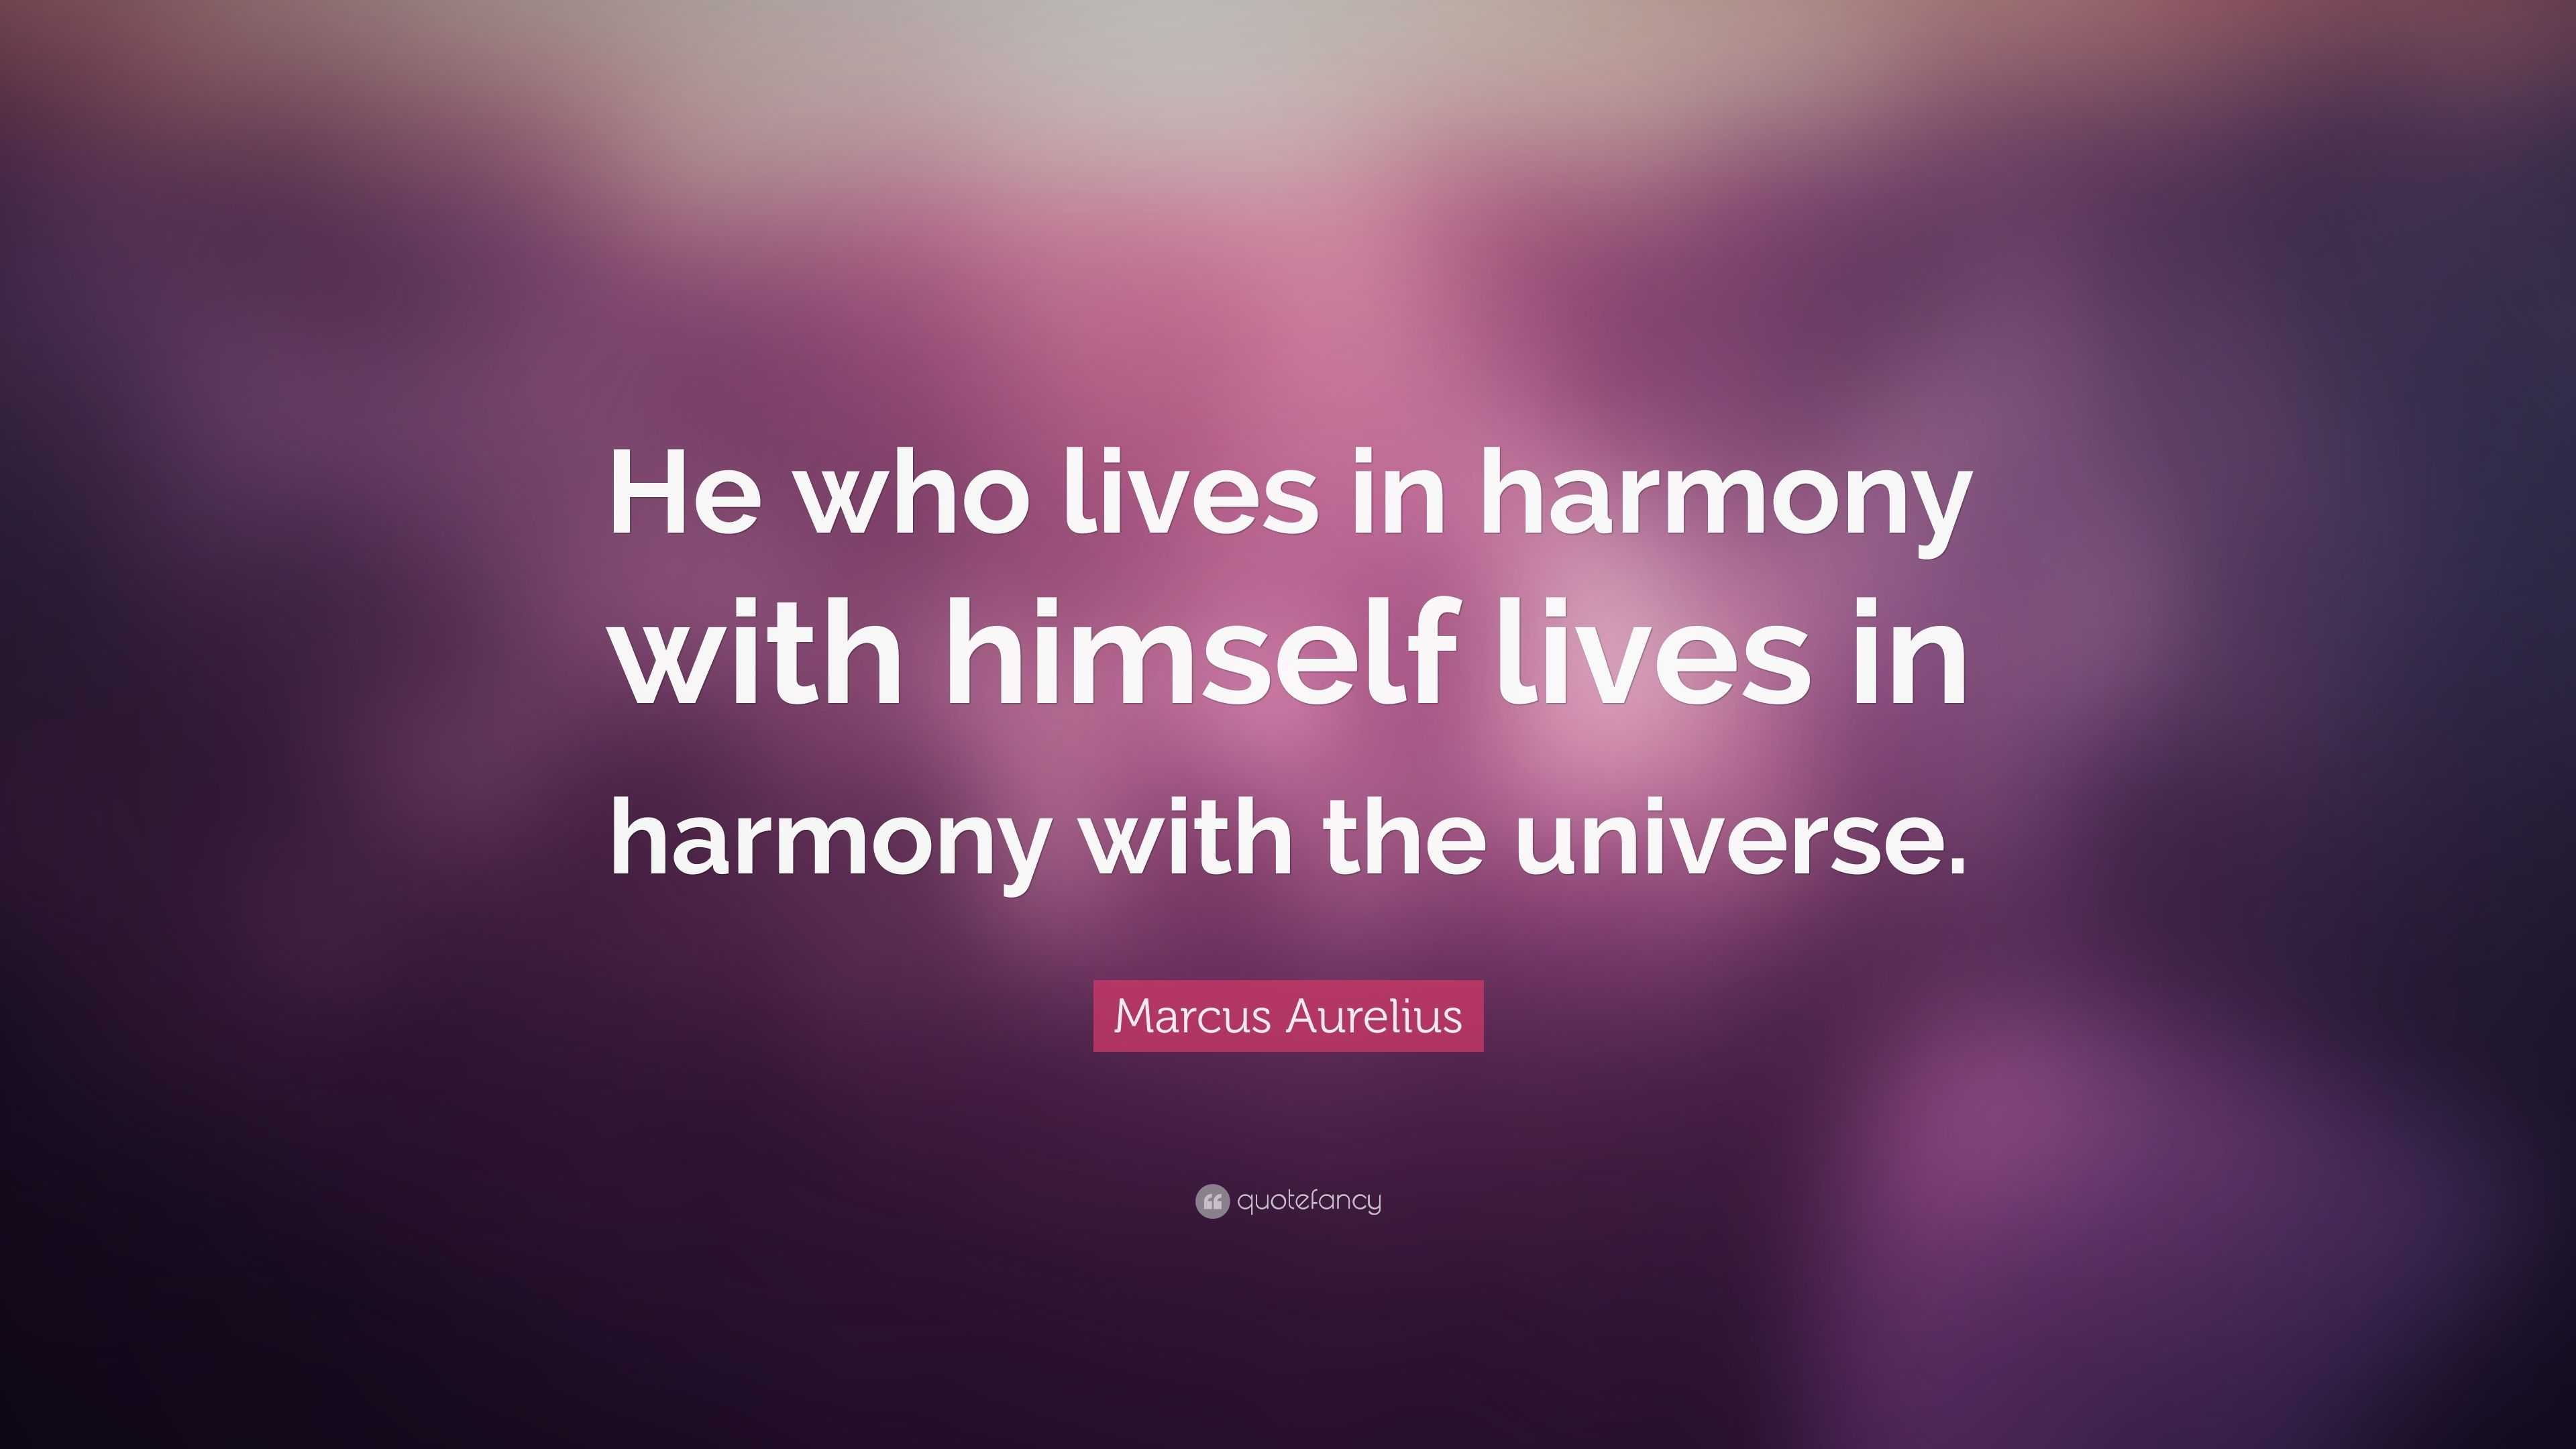 Marcus Aurelius Quote: “He who lives in harmony with himself lives in